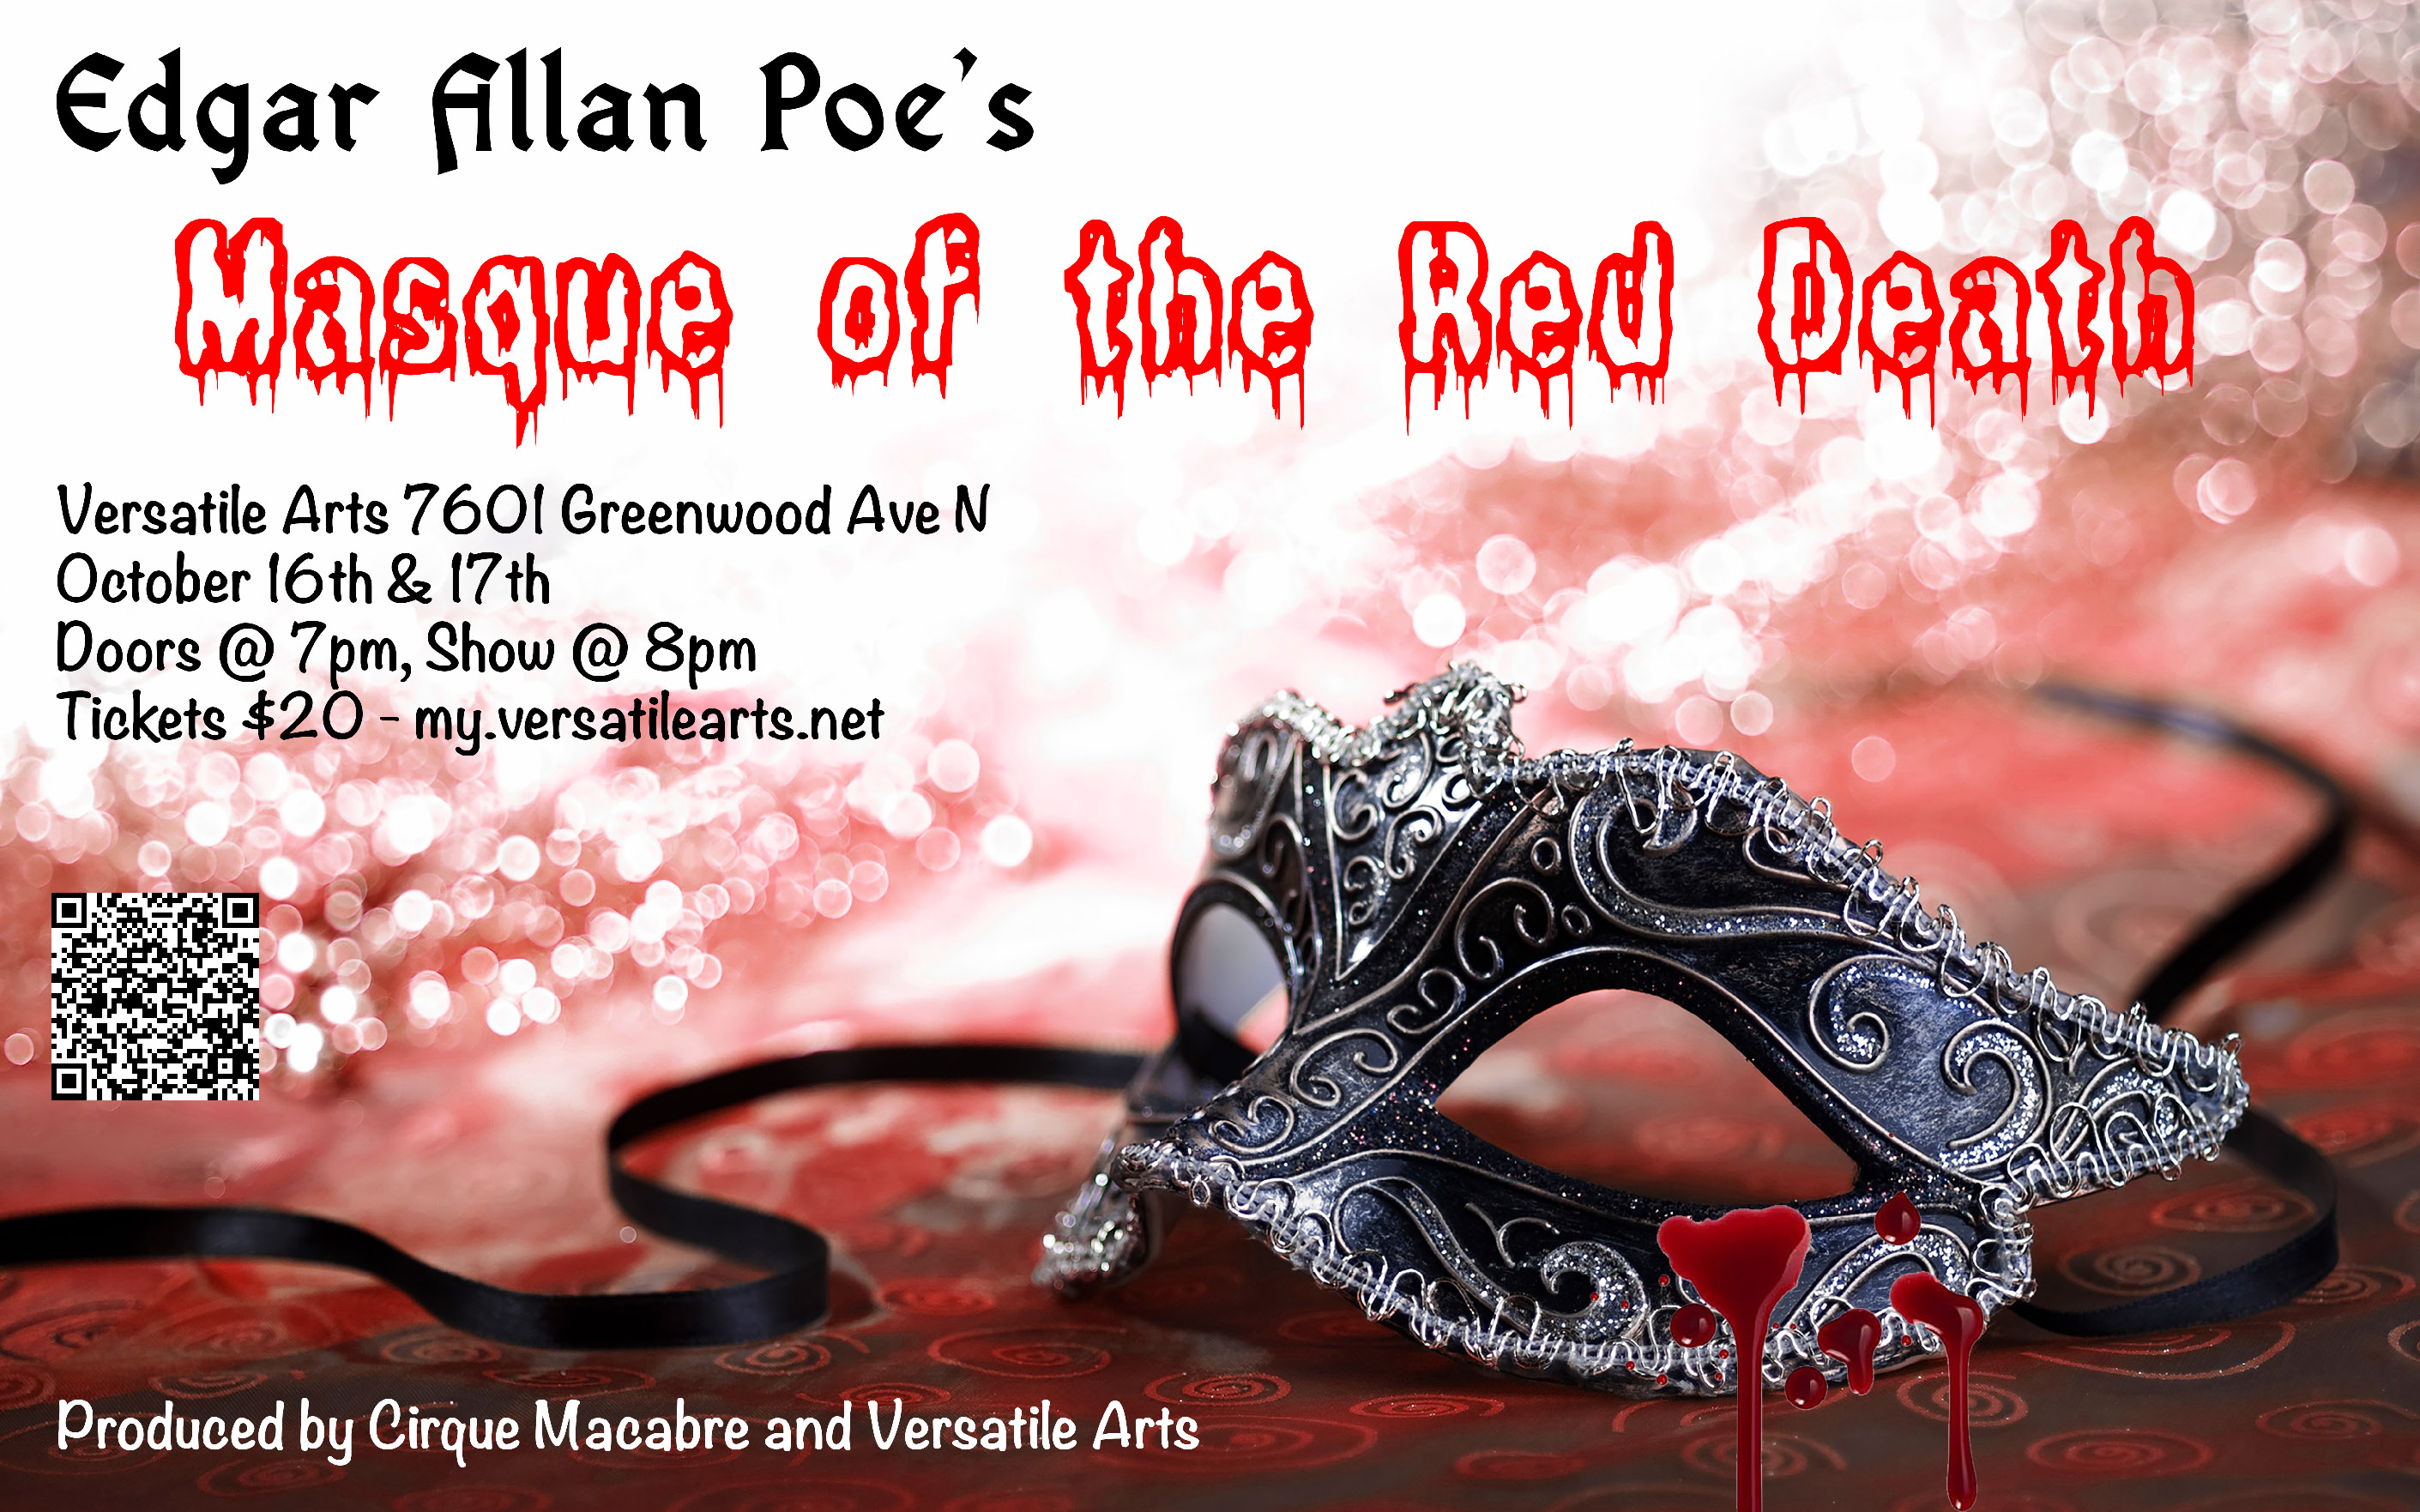 Edgar Allen Poe's Masque Of The Red Death Oct 16th and 17th at 8pm Versatile Arts Tickets $20 my.versatilearts.net